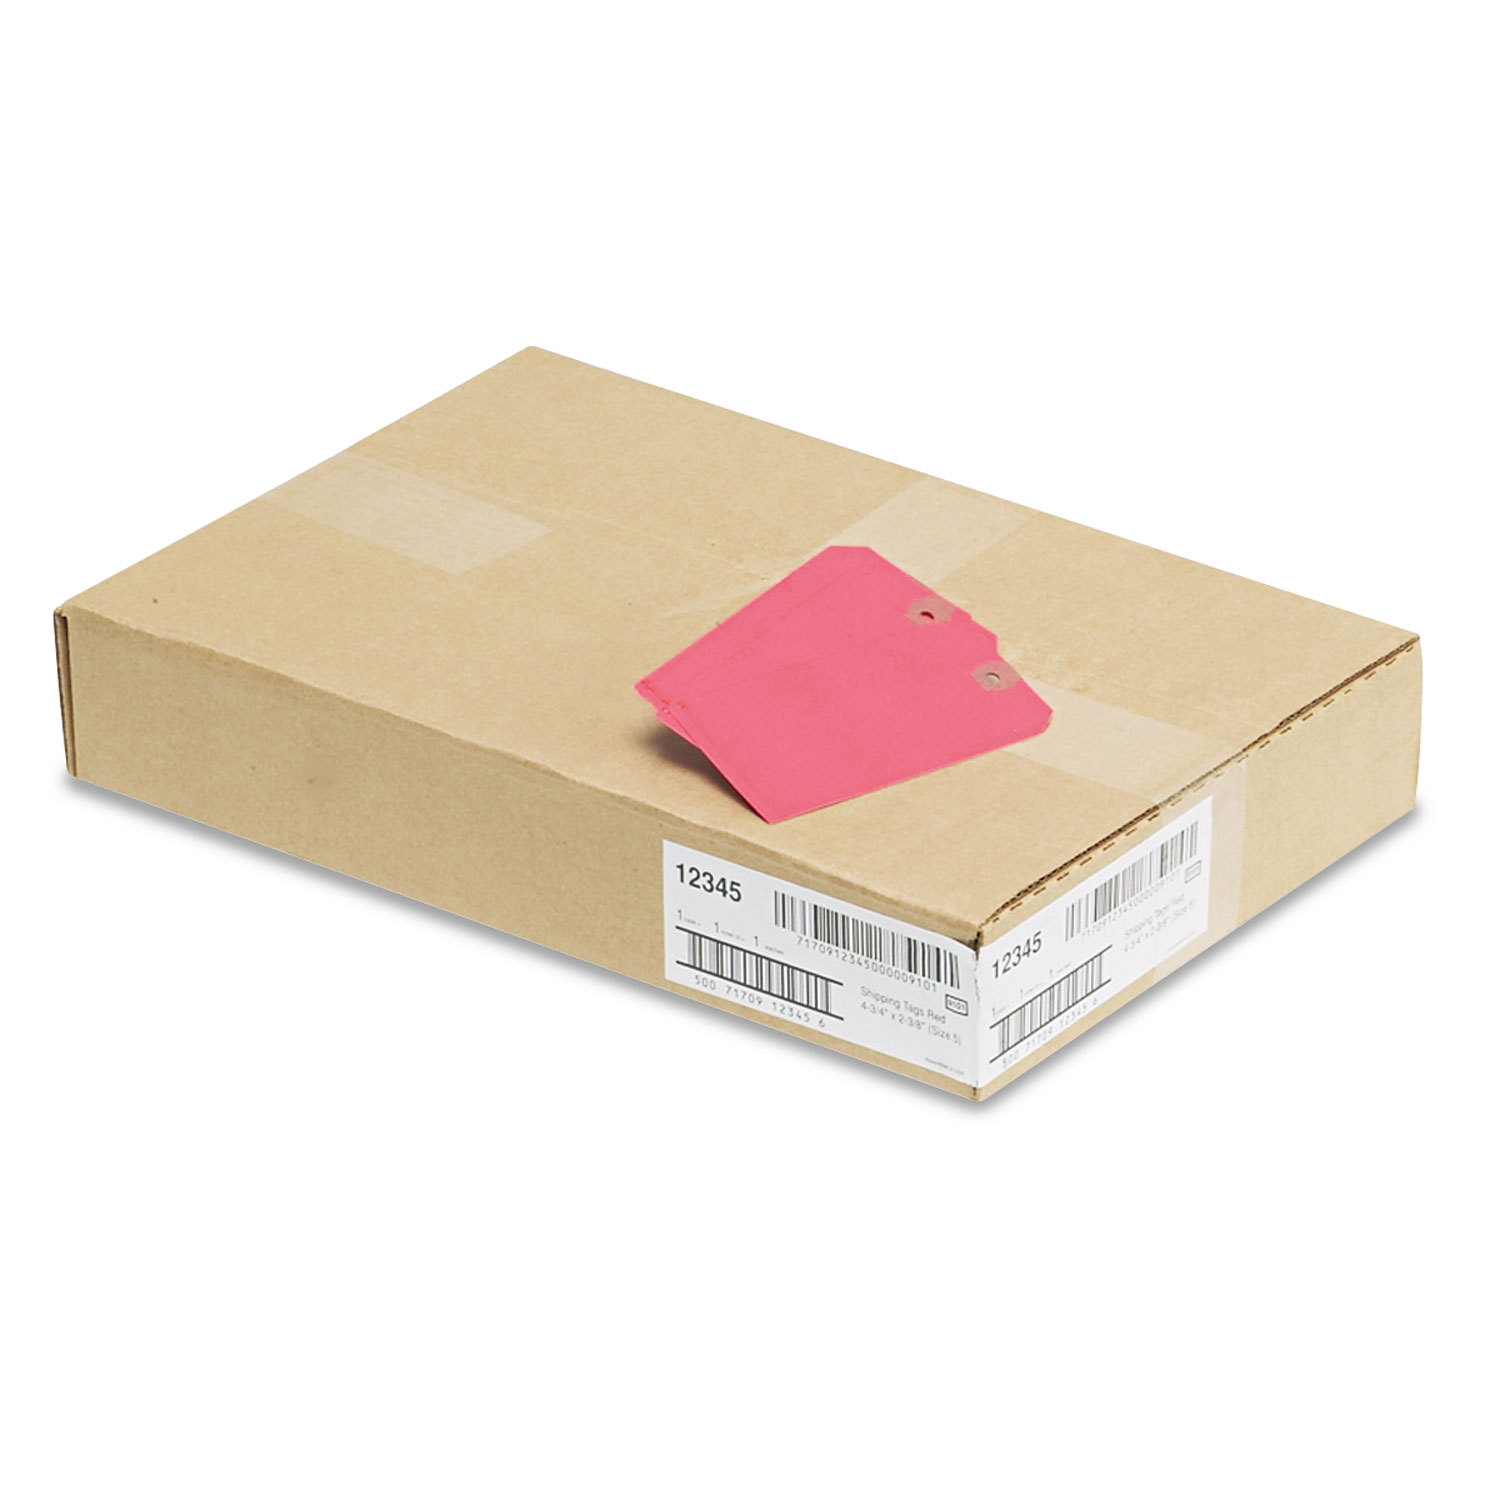 Unstrung Shipping Tags, Paper, 4 3/4 x 2 3/8, Red, 1,000/Box